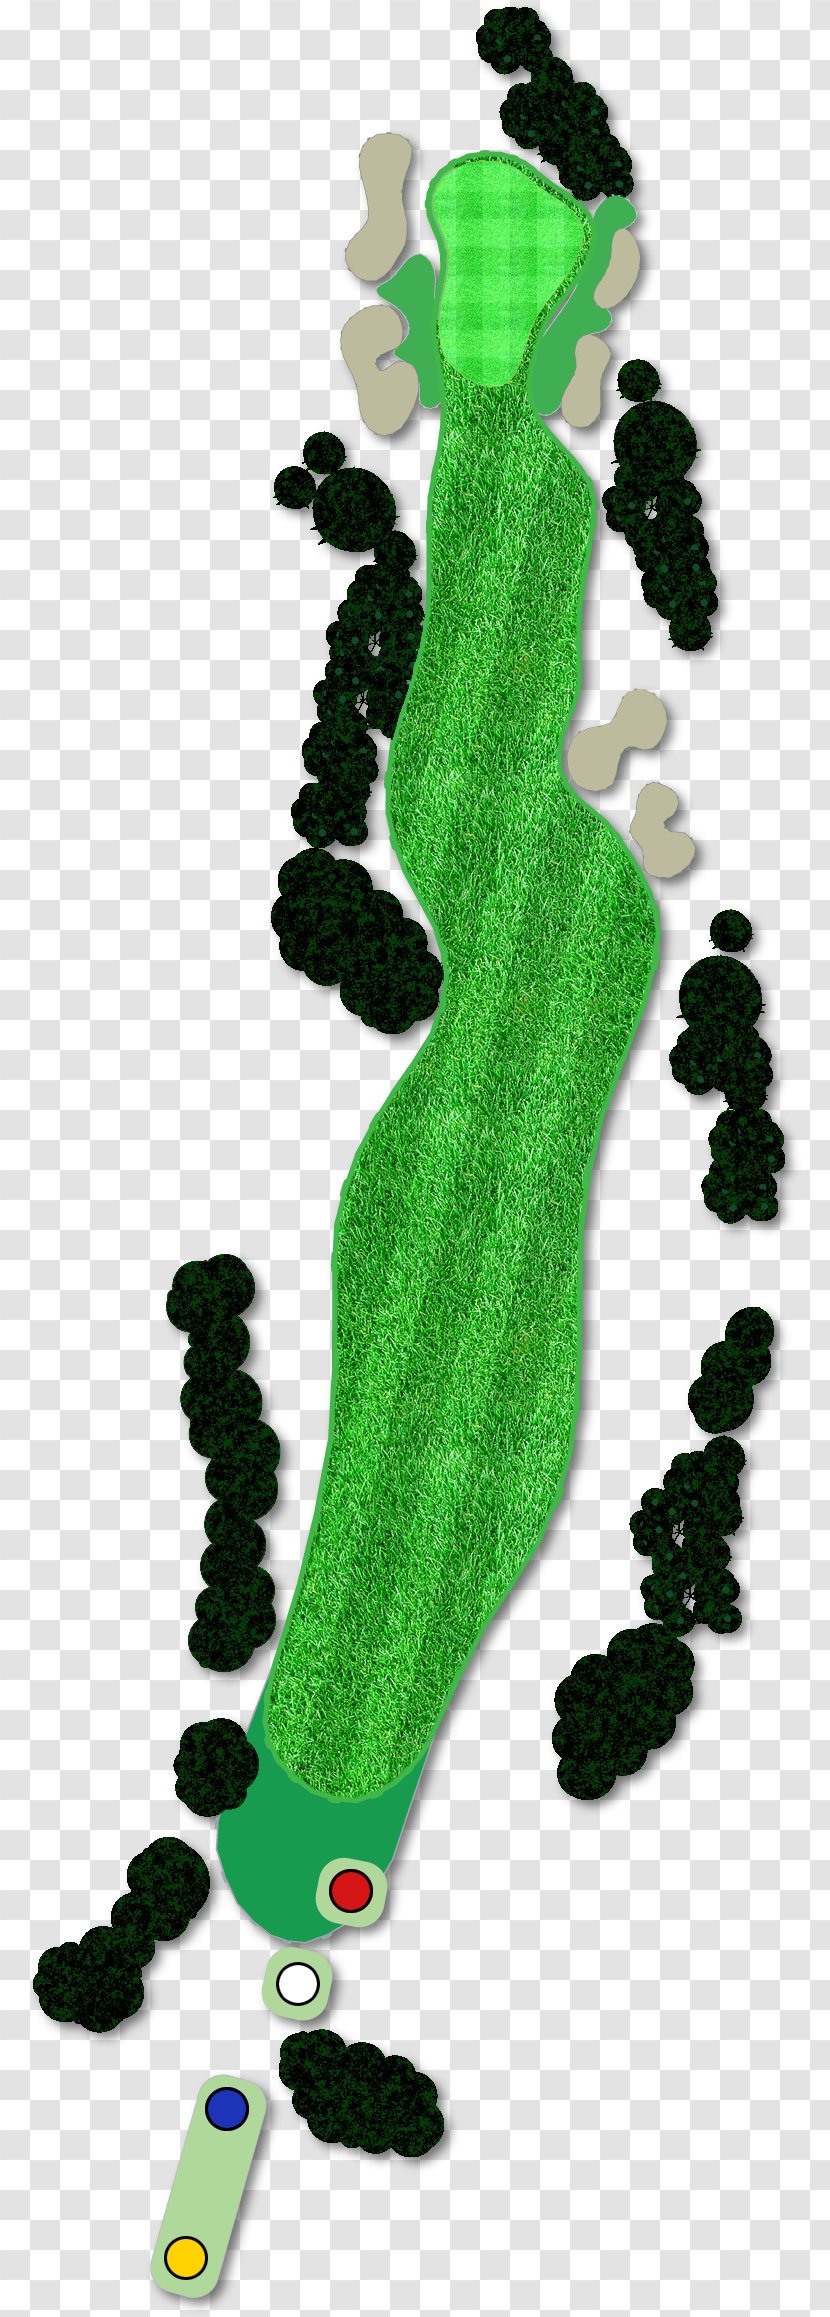 Character Fiction Tree - Nizels Golf Country Club Transparent PNG